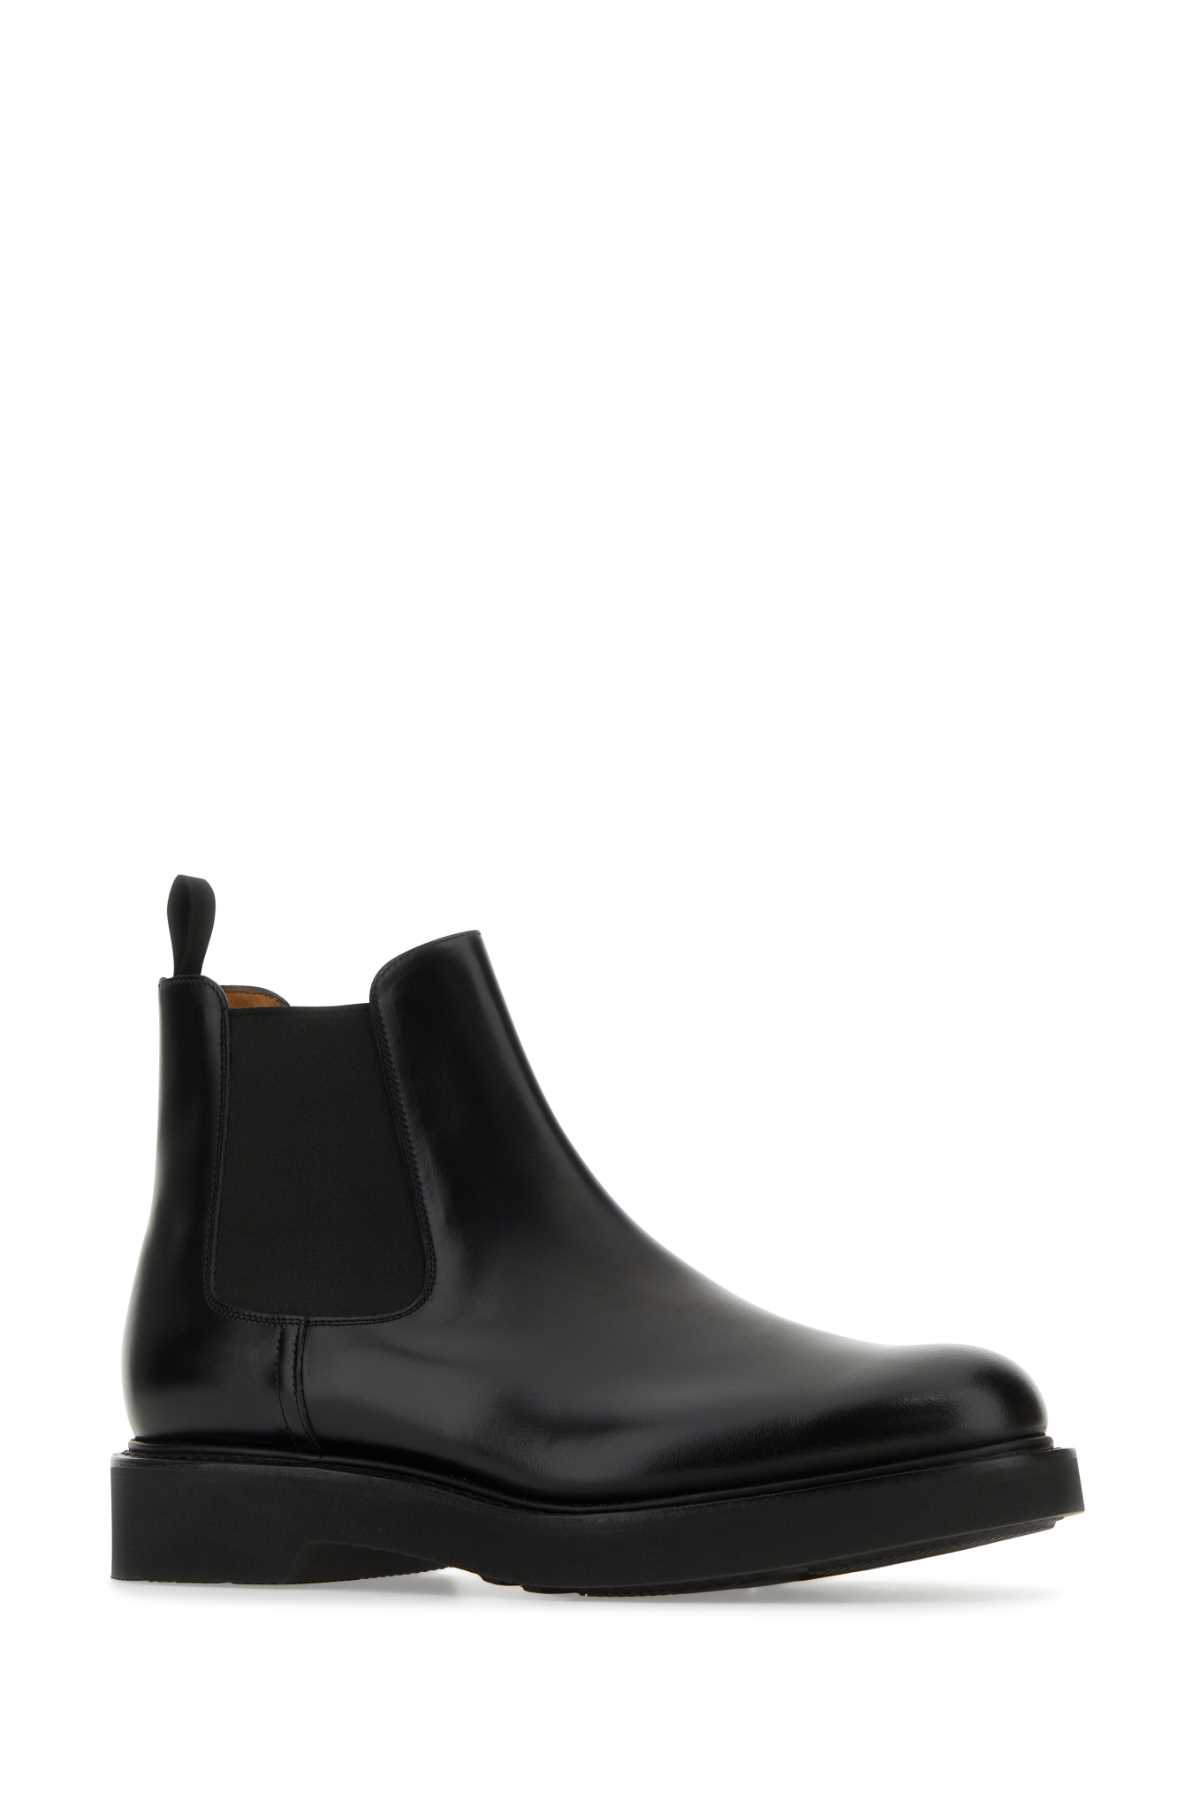 Church's Black Leather Leicester Ankle Boots